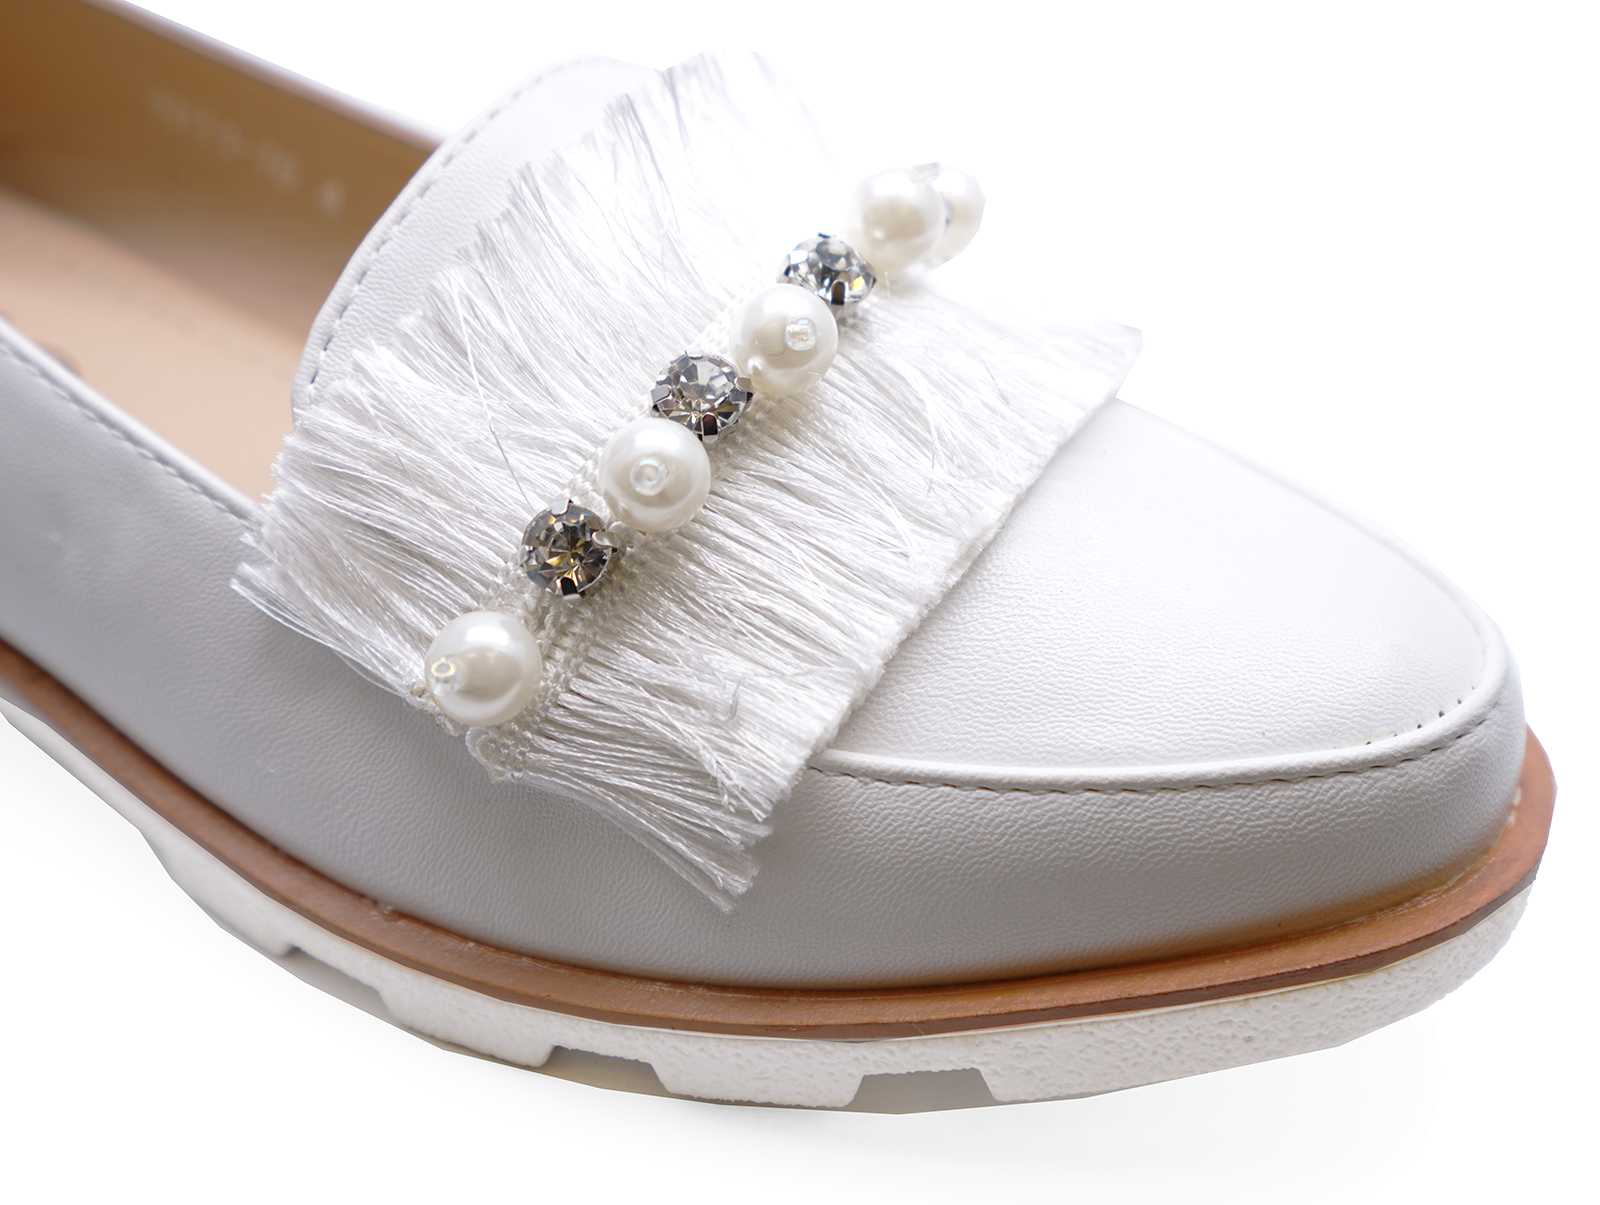 LADIES WHITE SLIP-ON SATIN LOAFERS SMART CASUAL FLAT COMFY ...